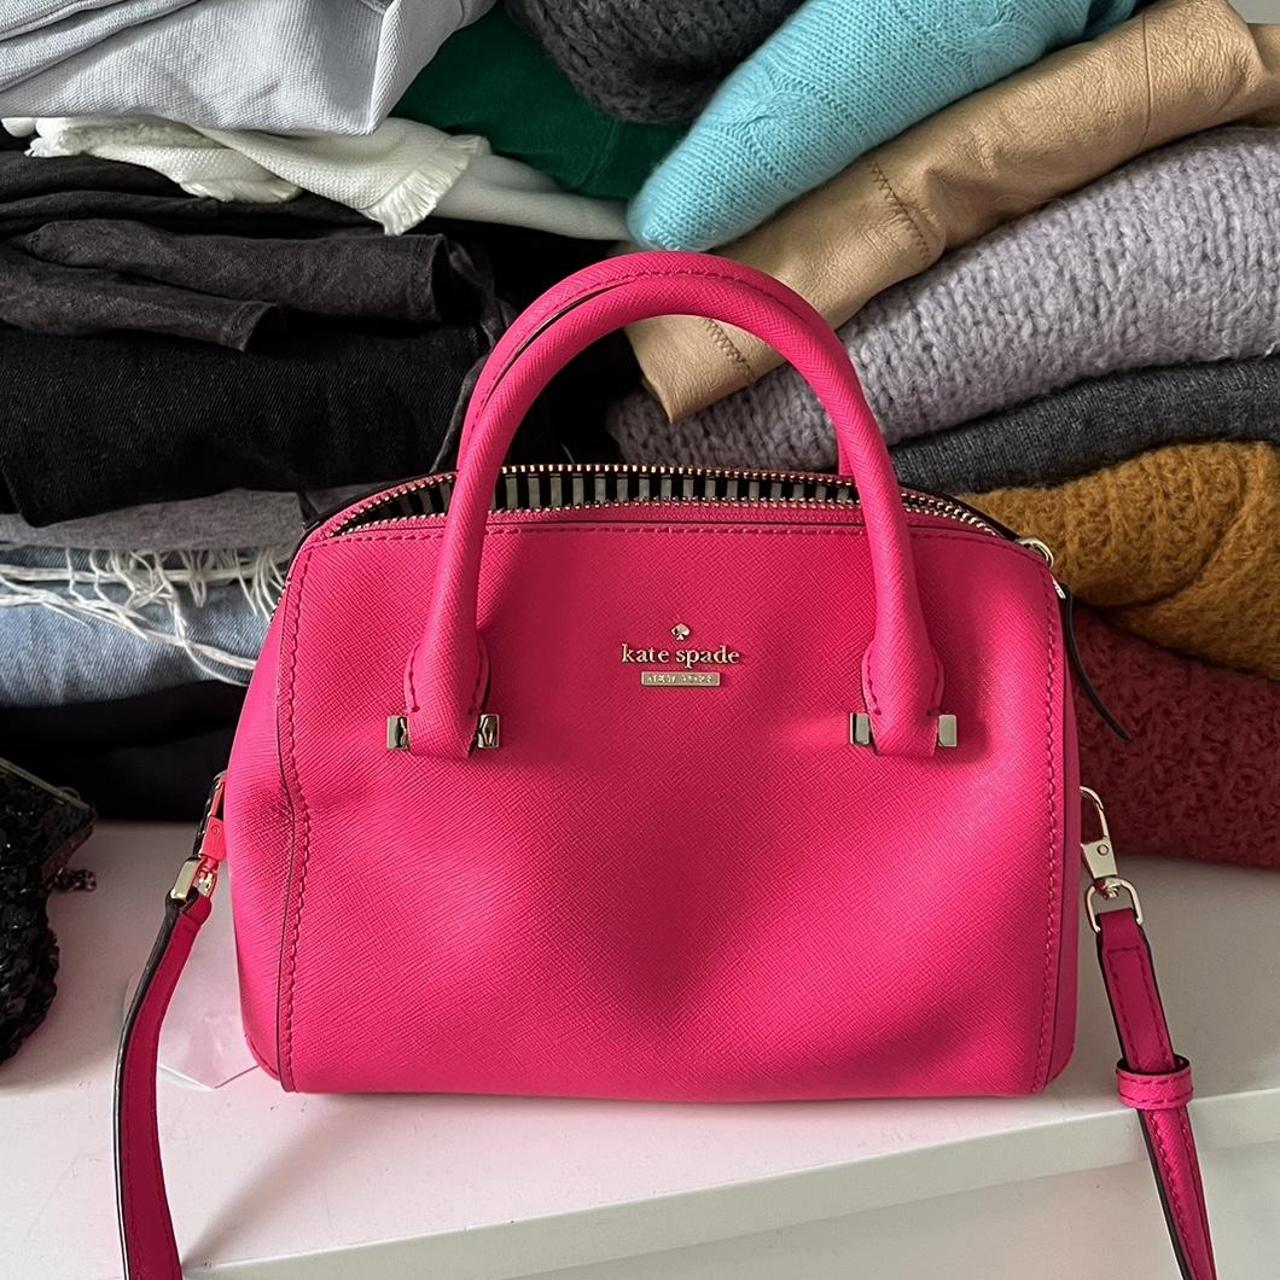 Kate Spade Fuzzy Pink Purse -message with - Depop